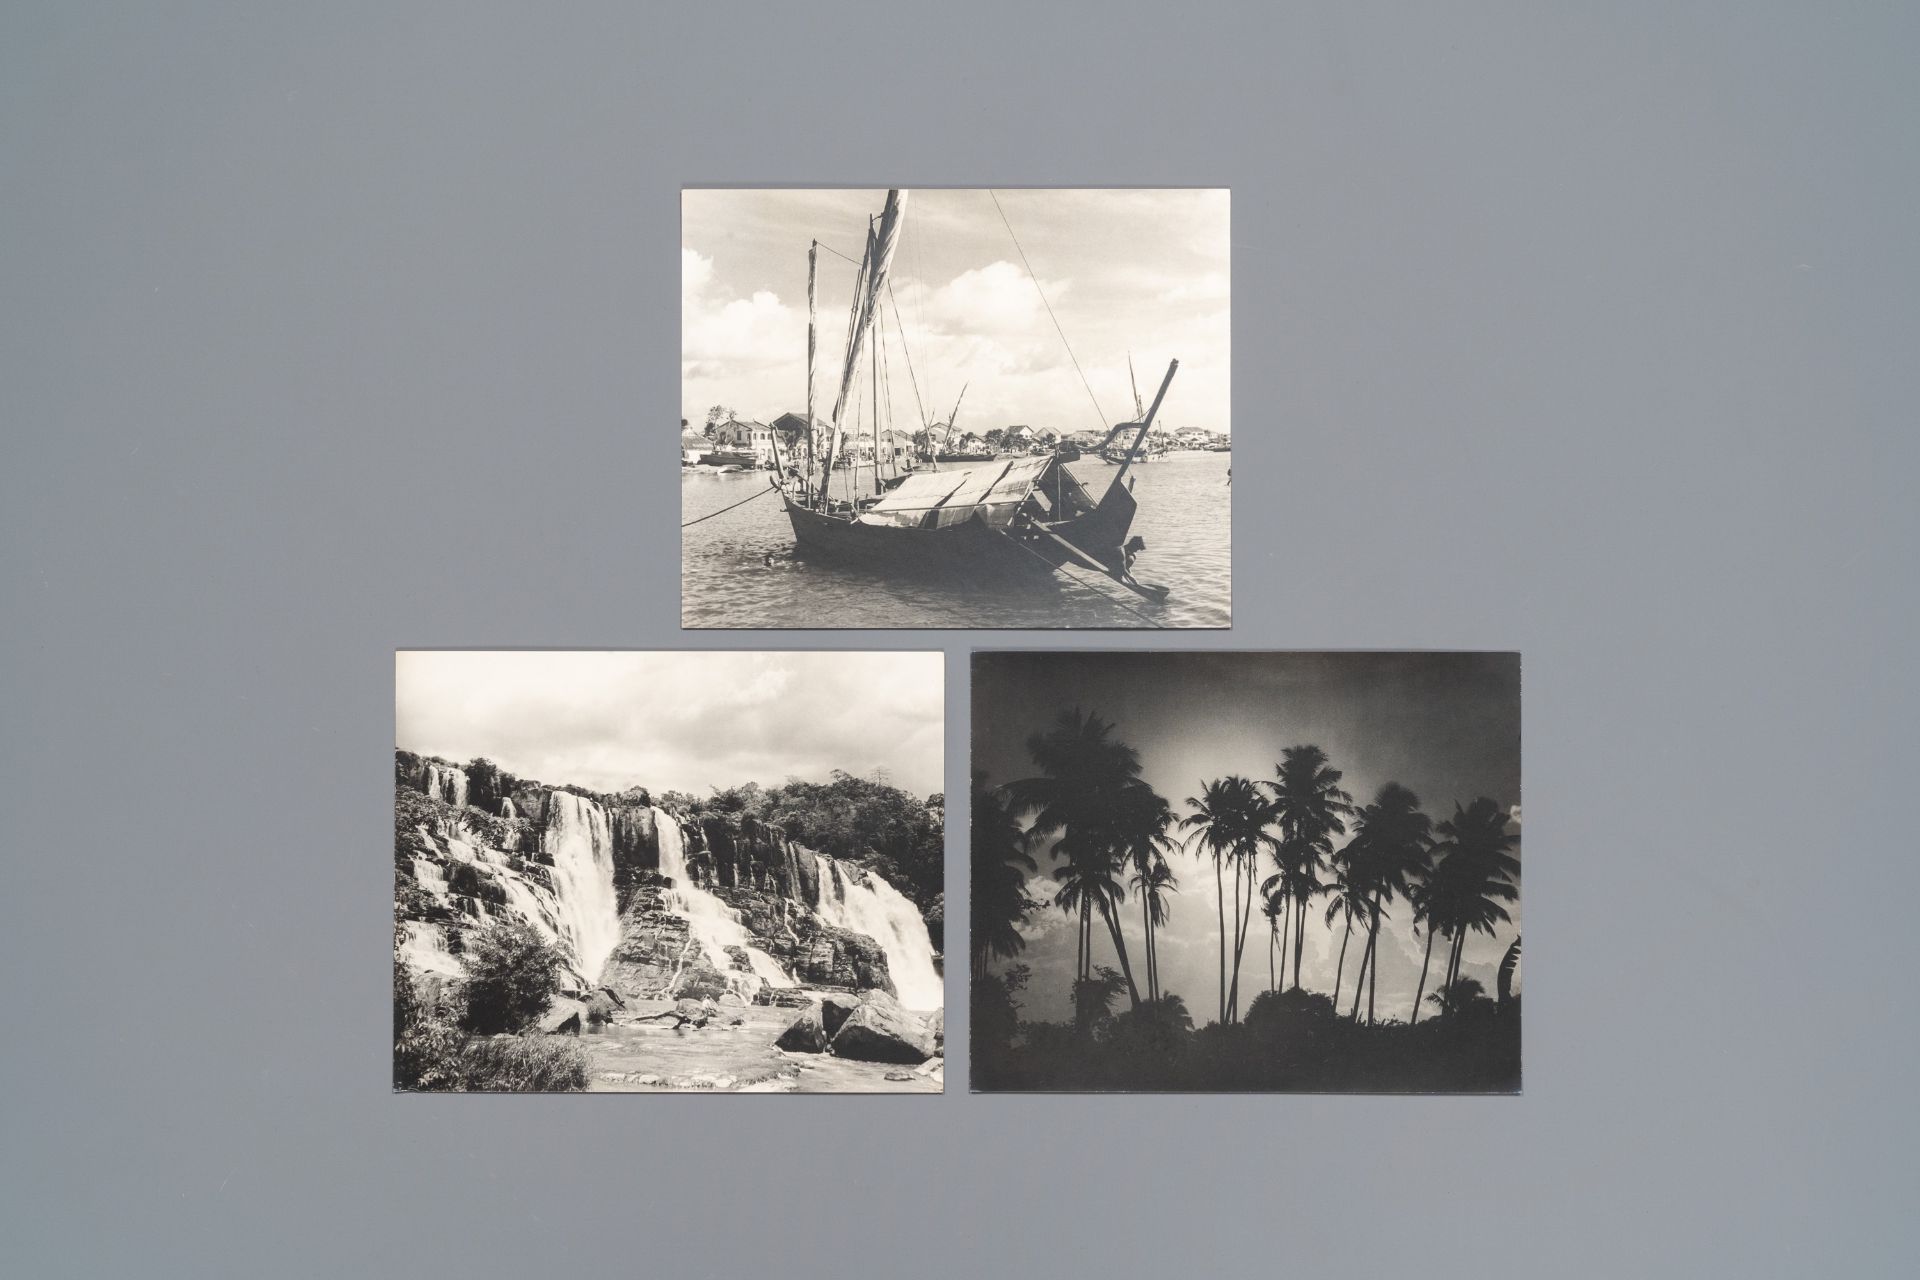 15 large black and white photos with indigenous people and landscape views, Vietnam, ca. 1900 - Image 3 of 5